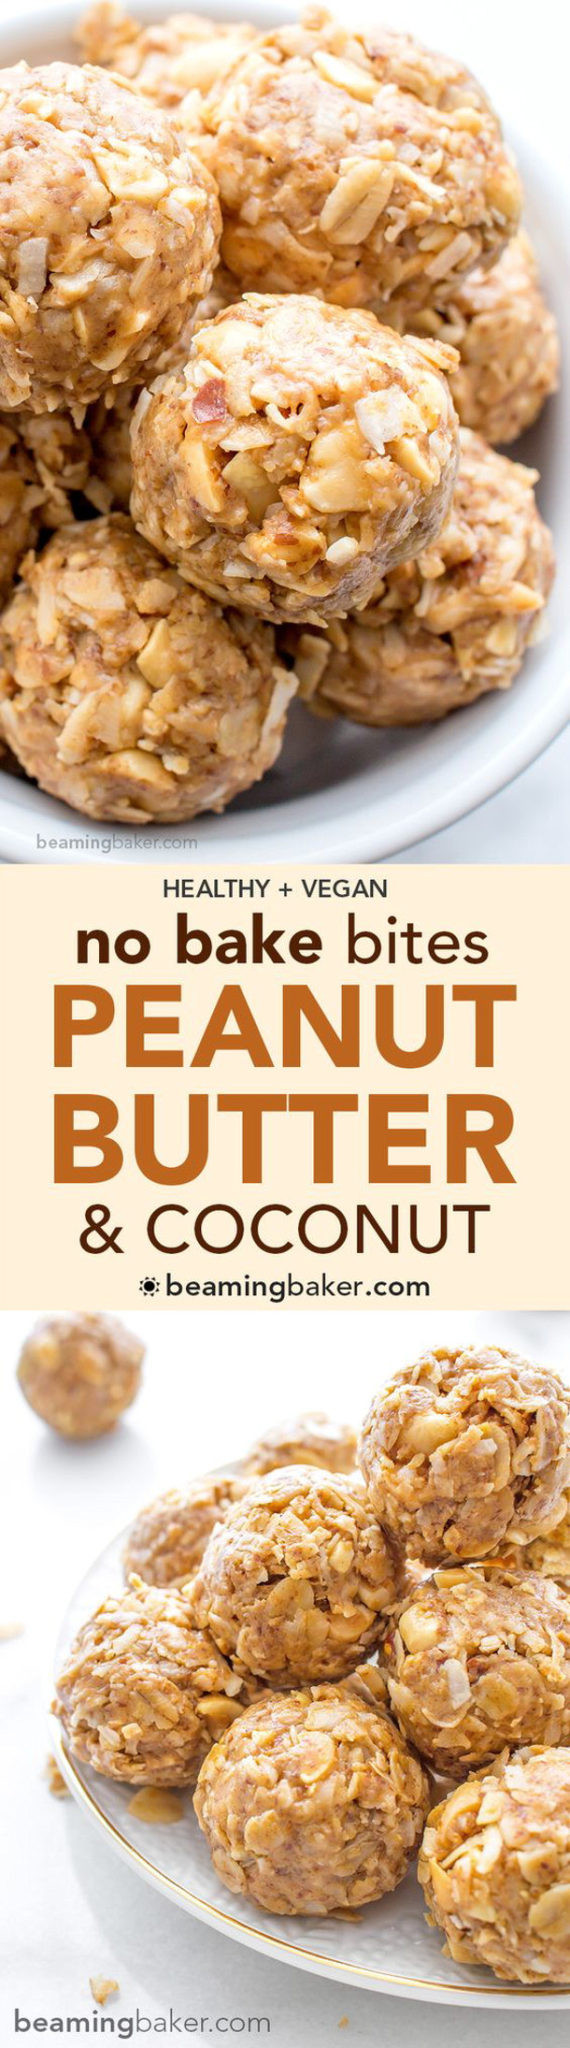 Healthy Baked Snacks Recipes
 Healthy Snacks and Treats Recipes The BEST and Yummiest